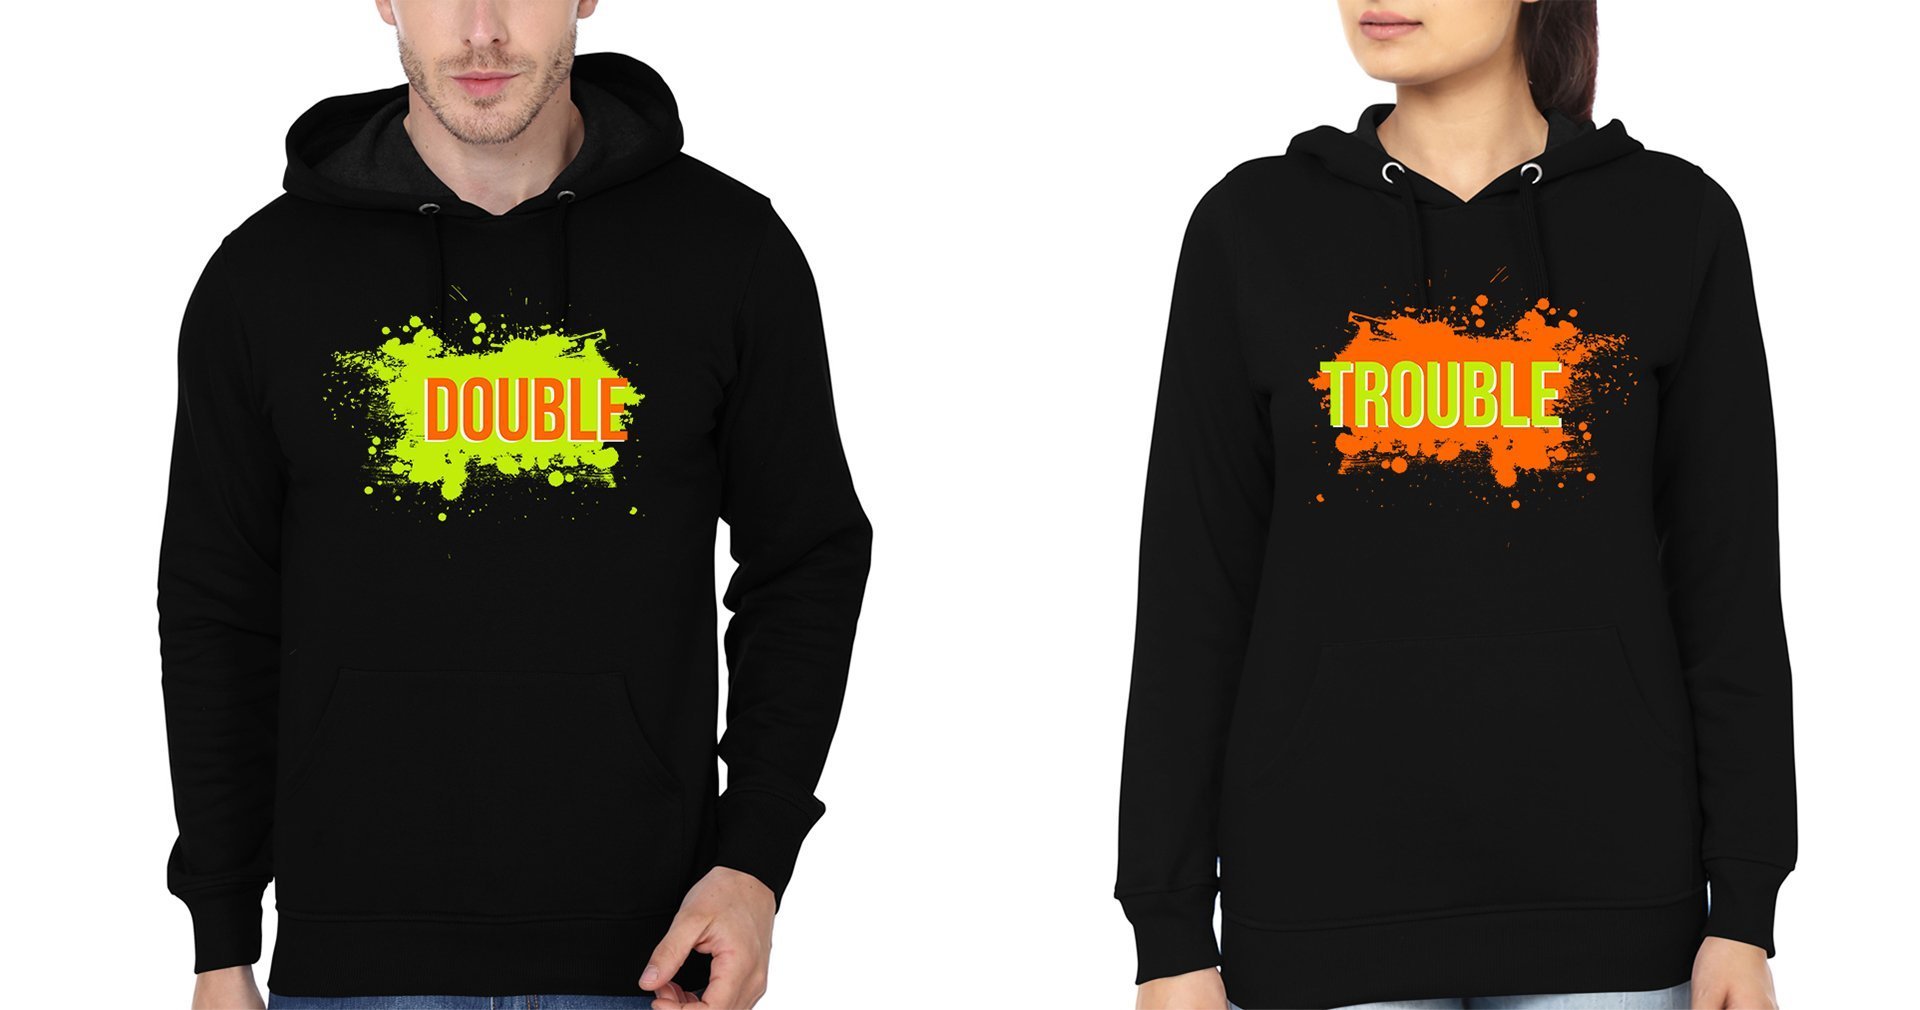 Doble Trouble BFF Hoodies-FunkyTradition - FunkyTradition